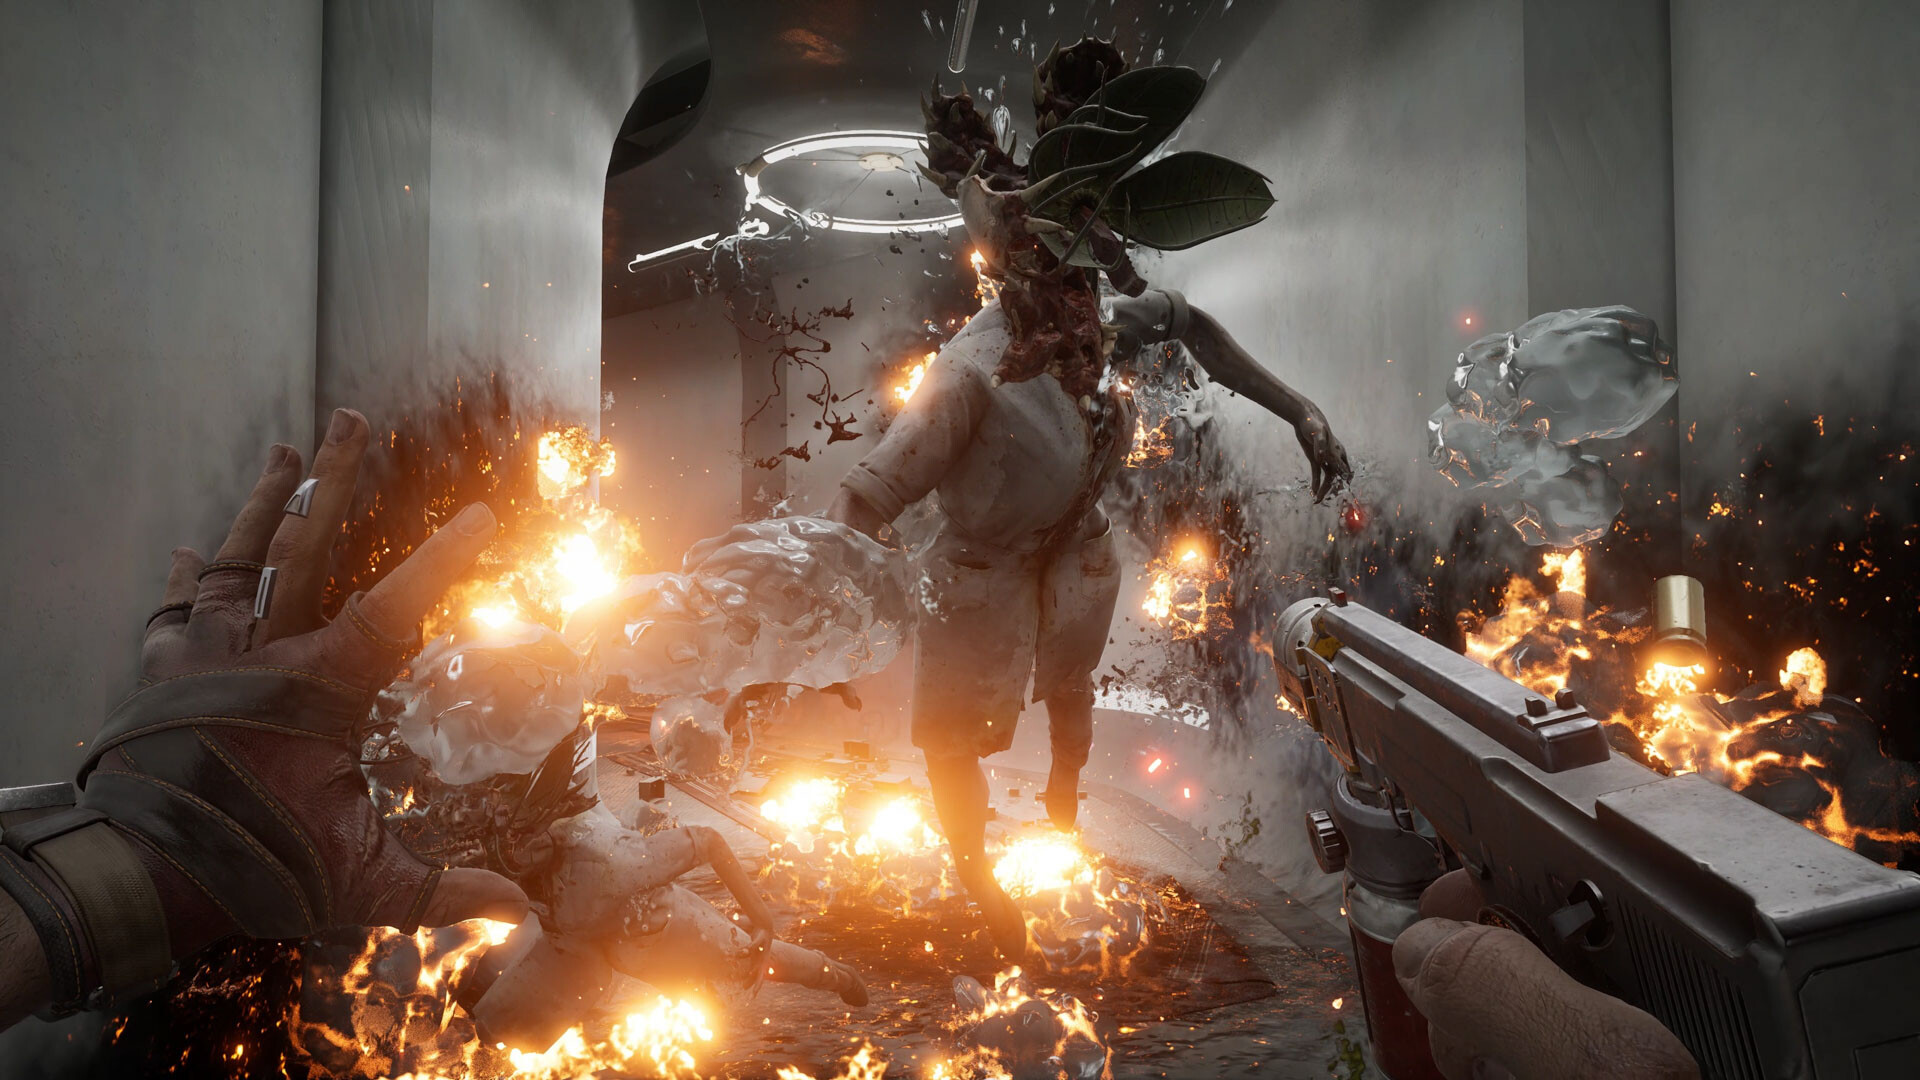 A player fires a pistol and casts fire effects on a creature with a splayed-open head in a screenshot from Atomic Heart